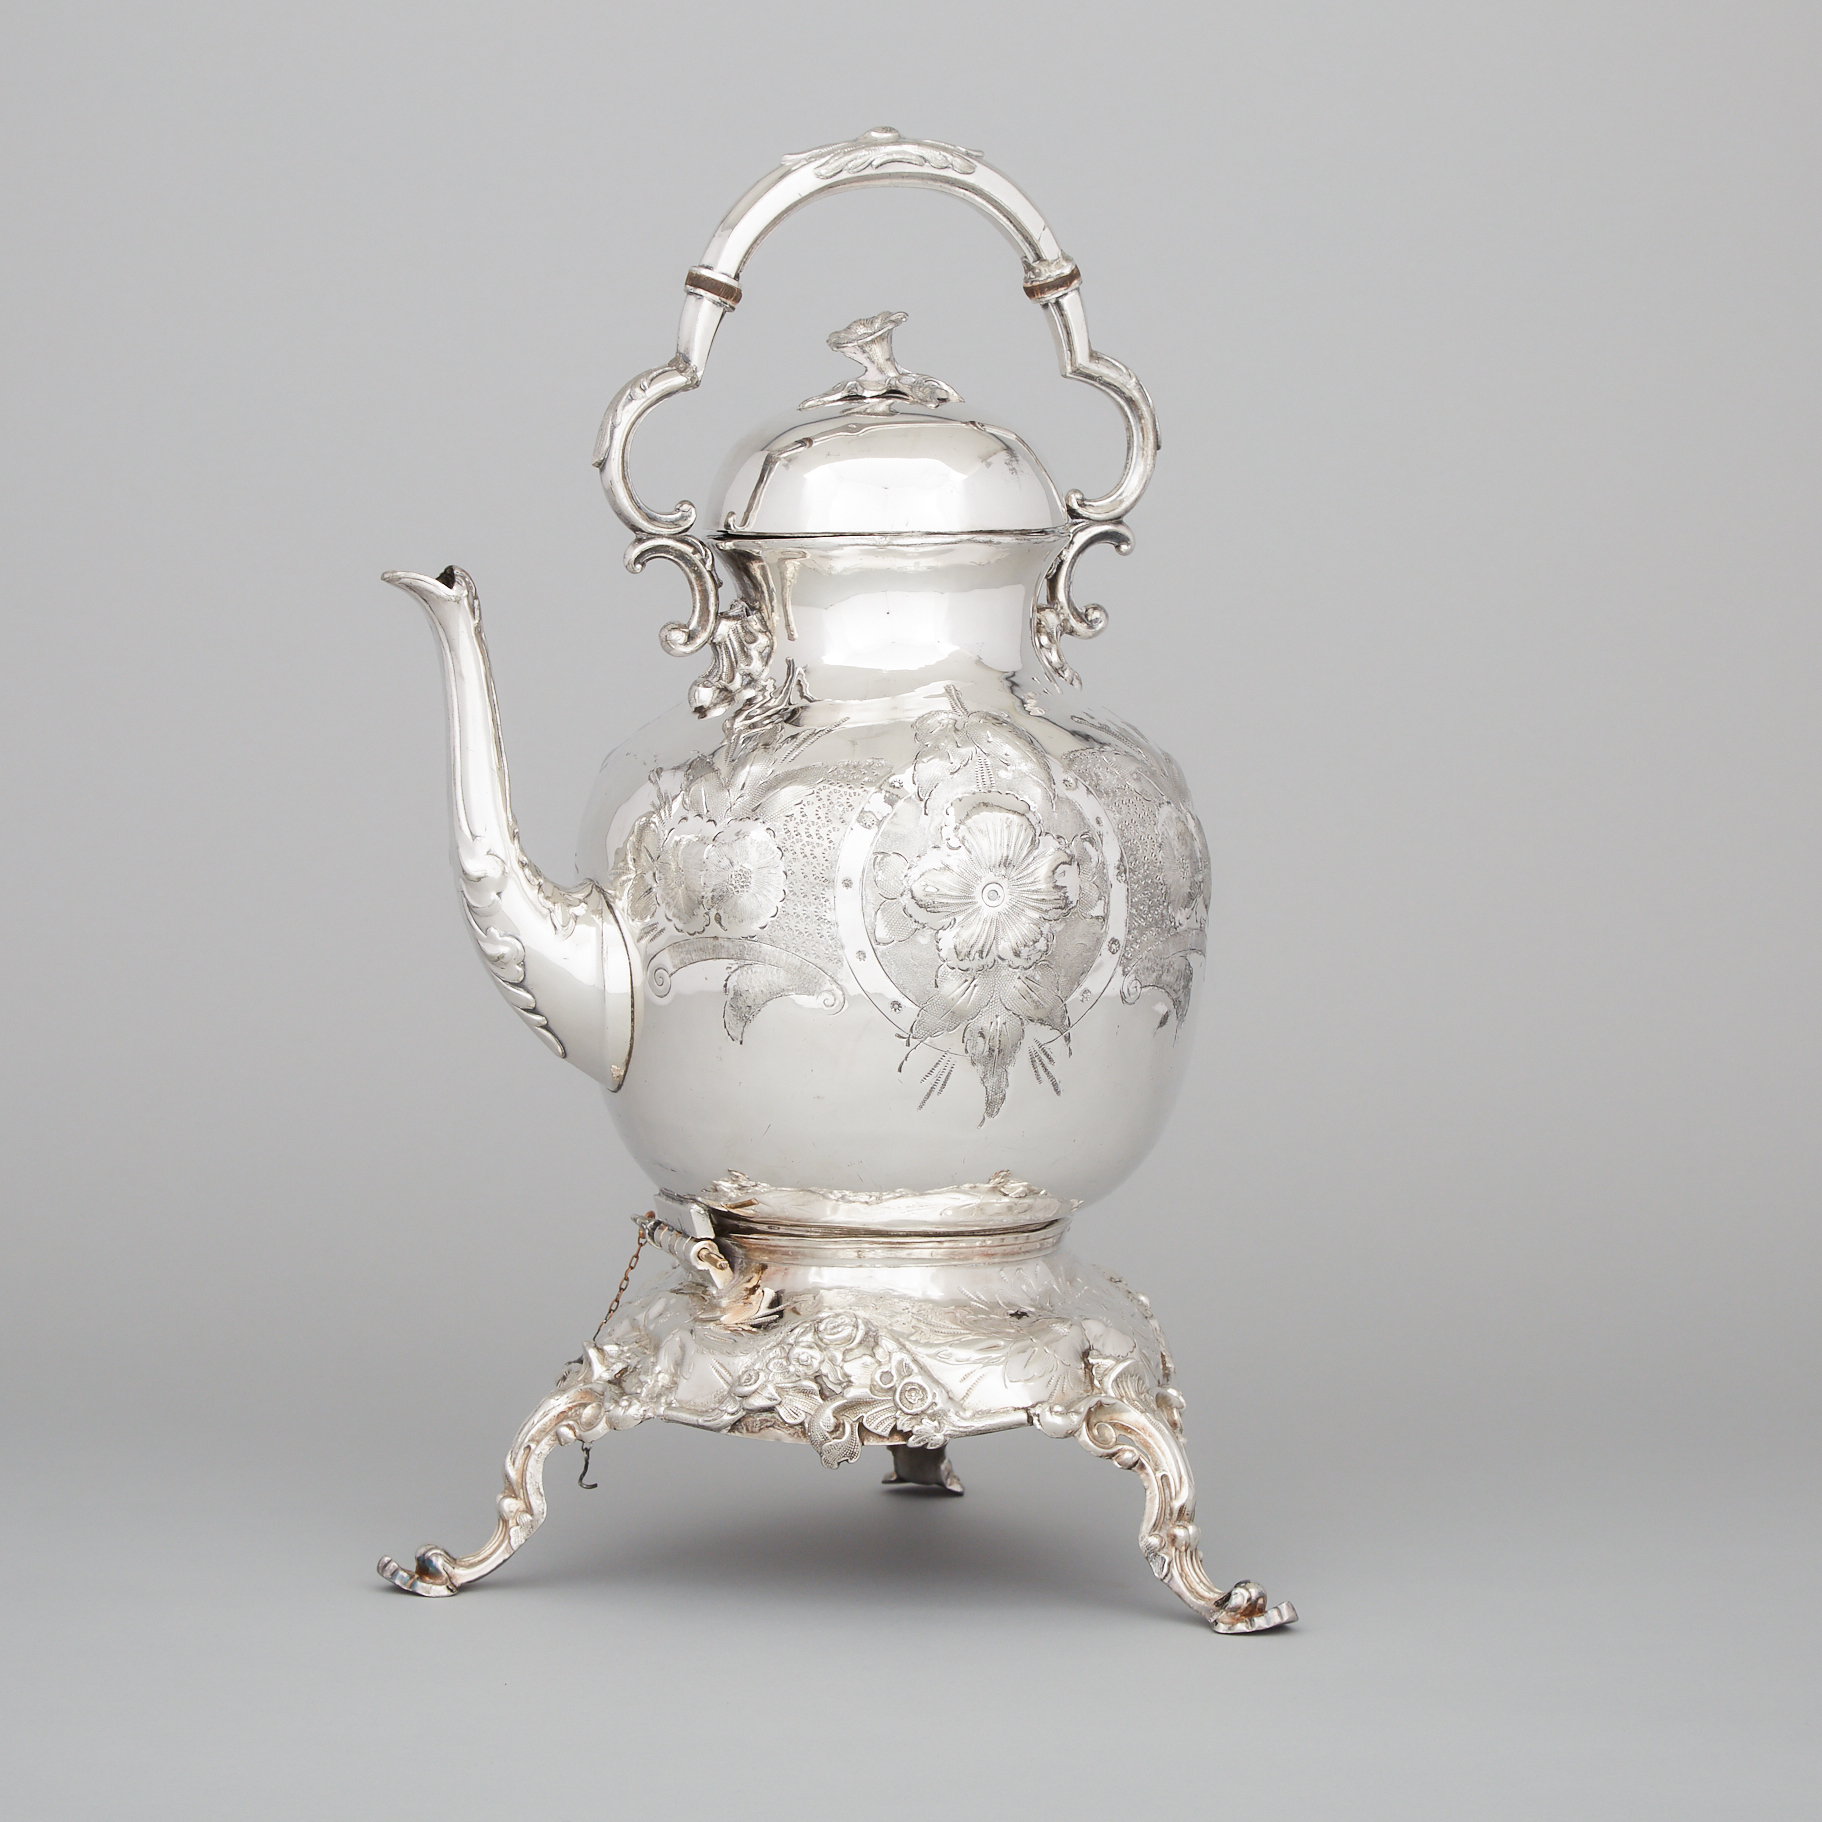 Victorian Silver Plated Kettle on Stand, mid-19th century